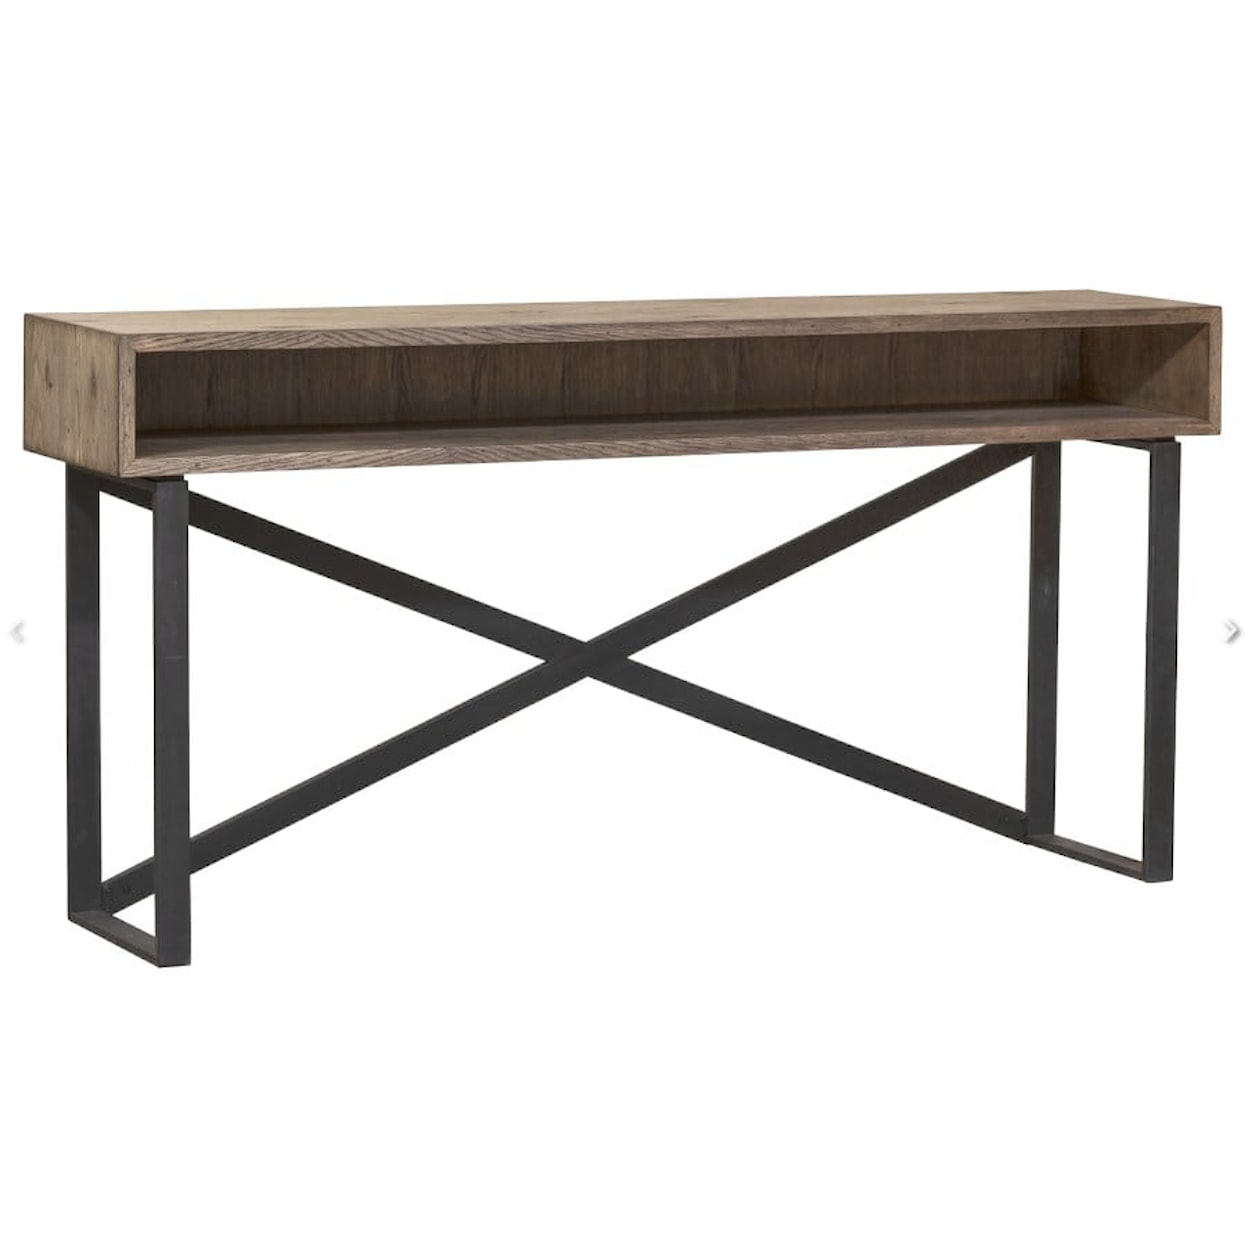 Fairfield Arcadian Collection Arcadian Open Storage Console Table